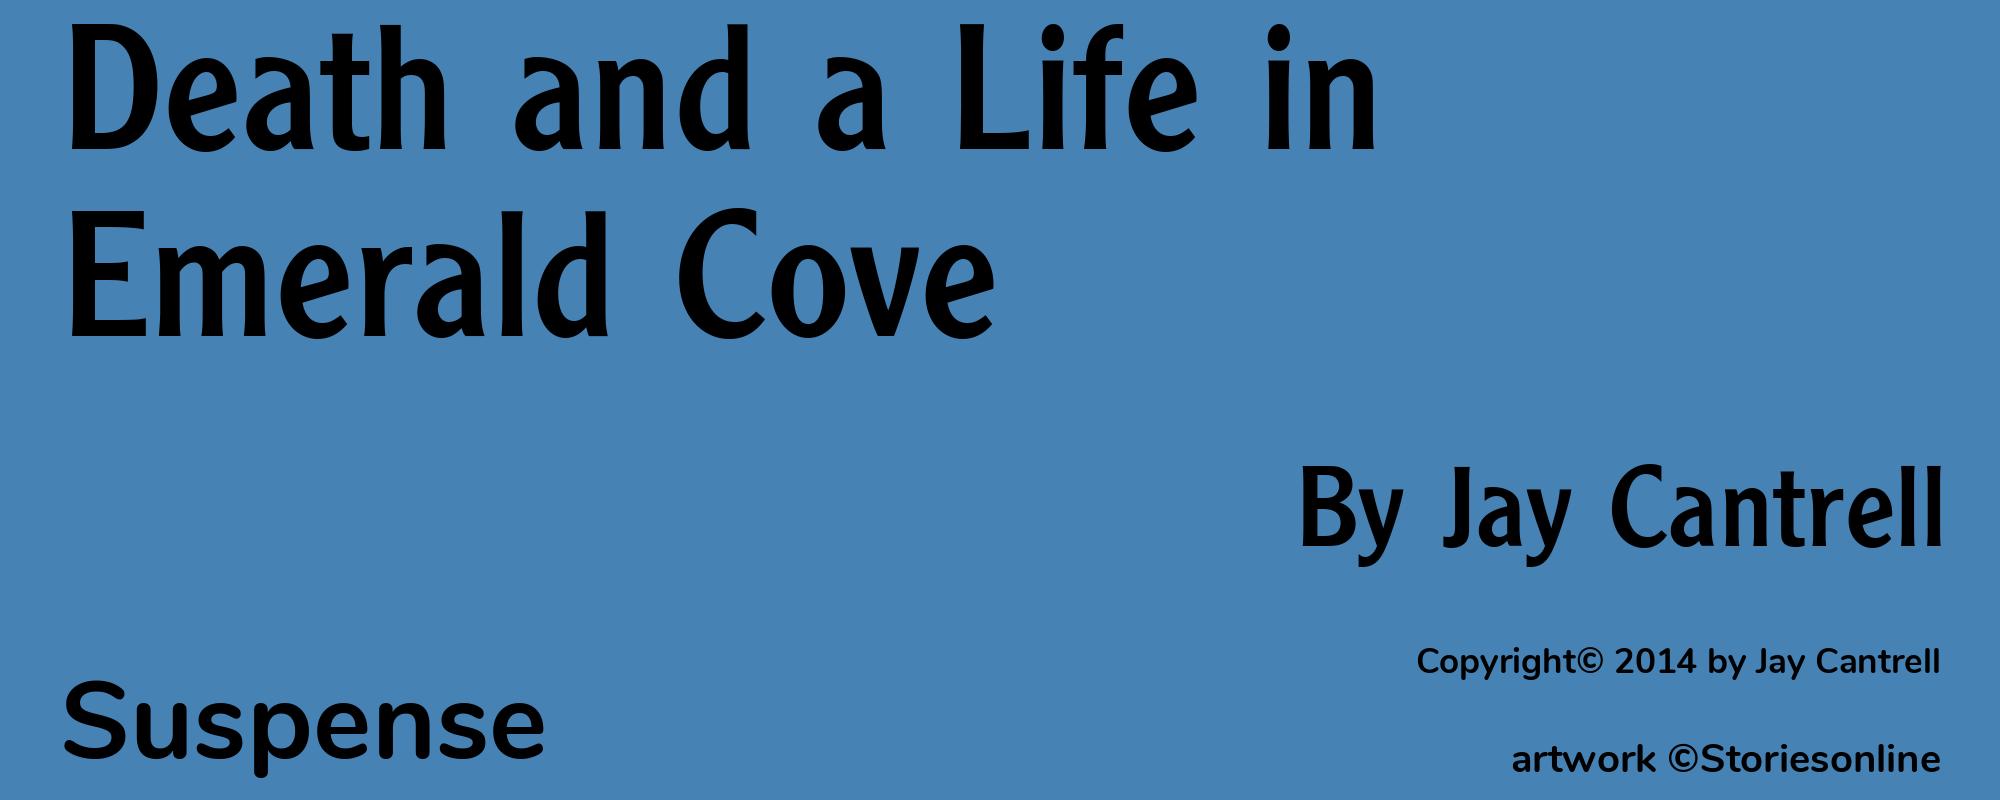 Death and a Life in Emerald Cove - Cover